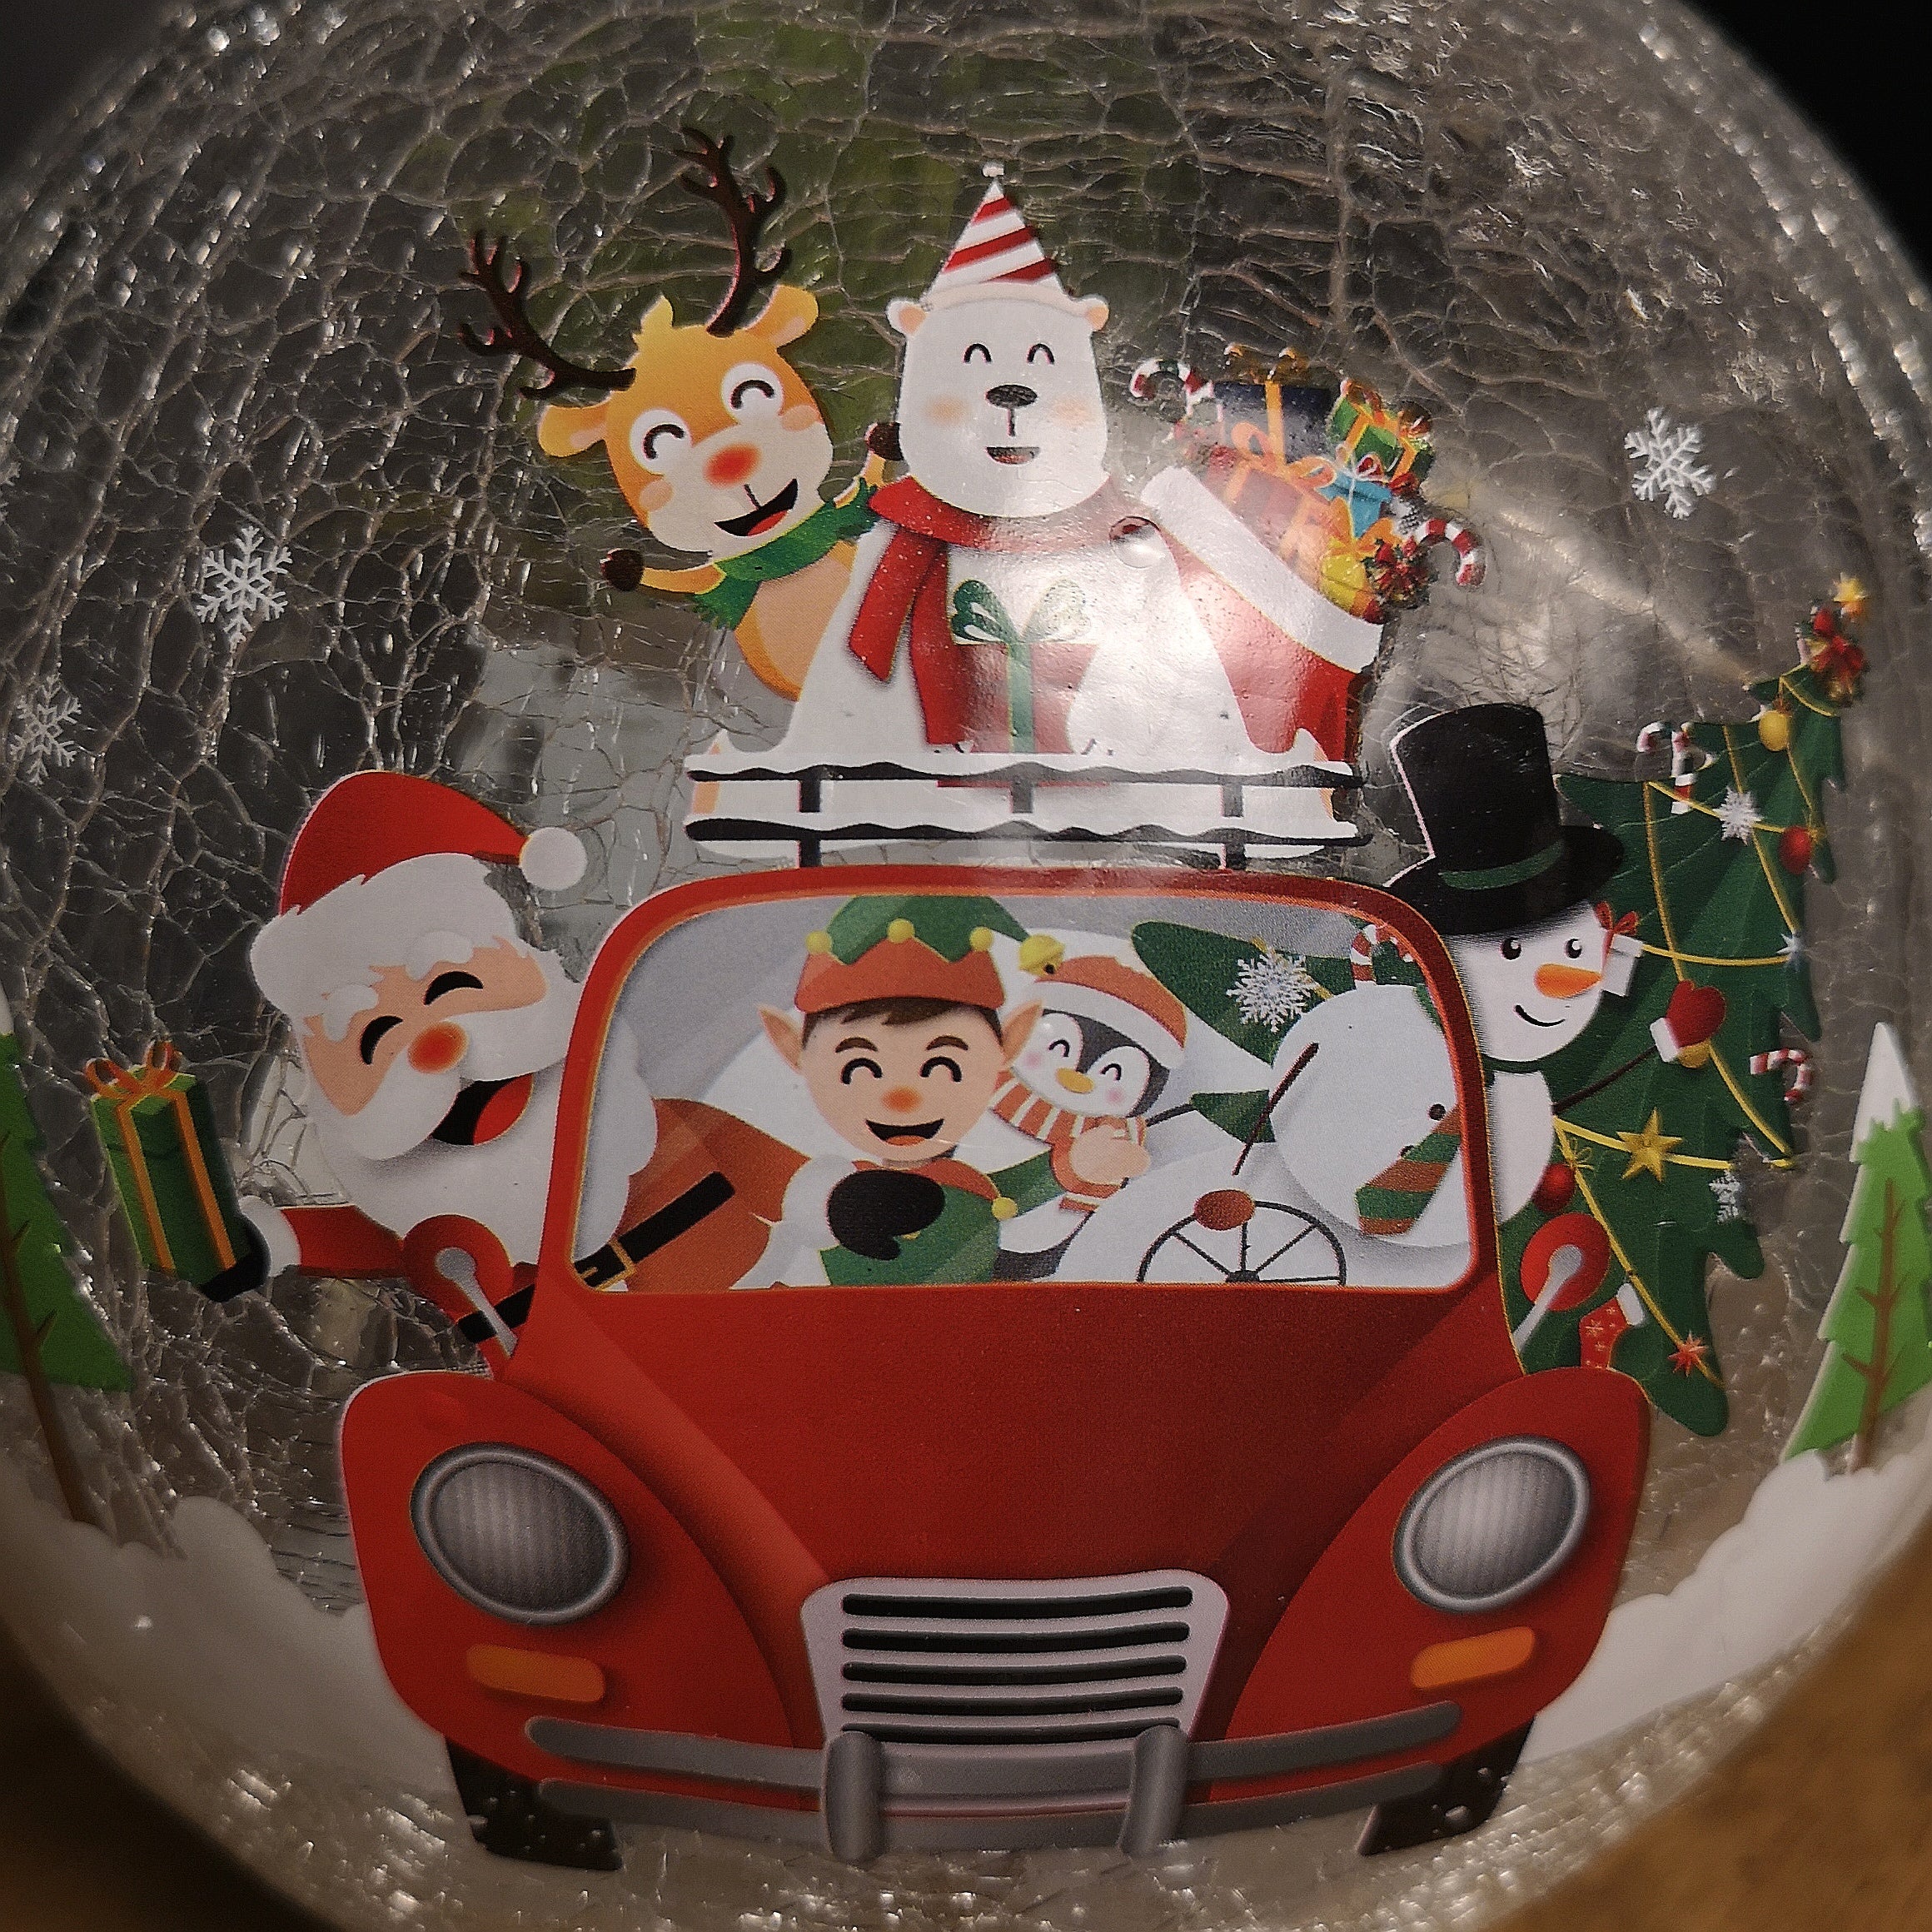 20cm Battery Operated Twinkling Warm White LED Crackle Effect Ball Decoration with Santa and Friends in Car